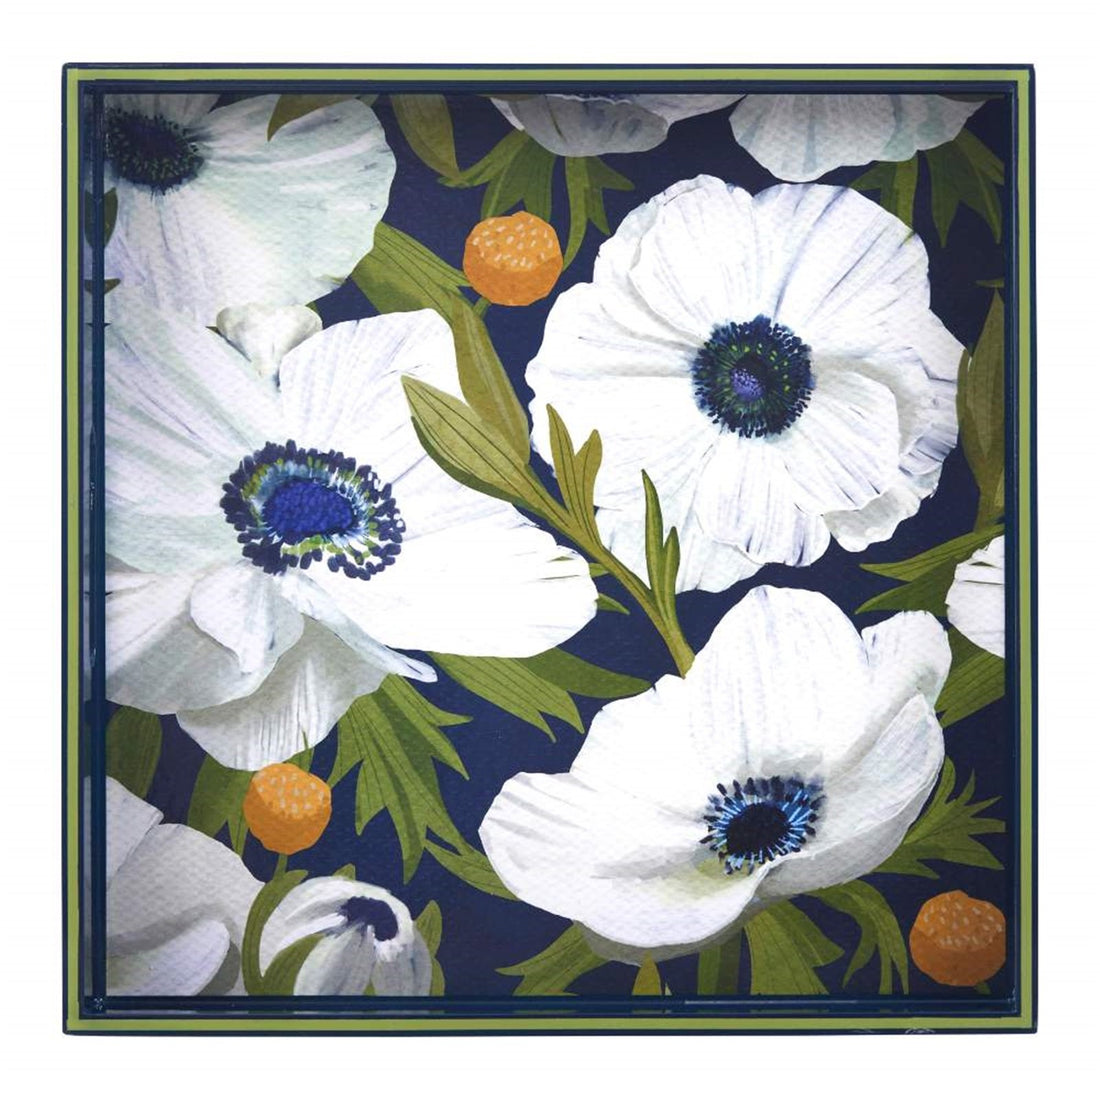 Anemone Poppy Tray - 15 Inch Square Floral Design Tray - rockflowerpaper